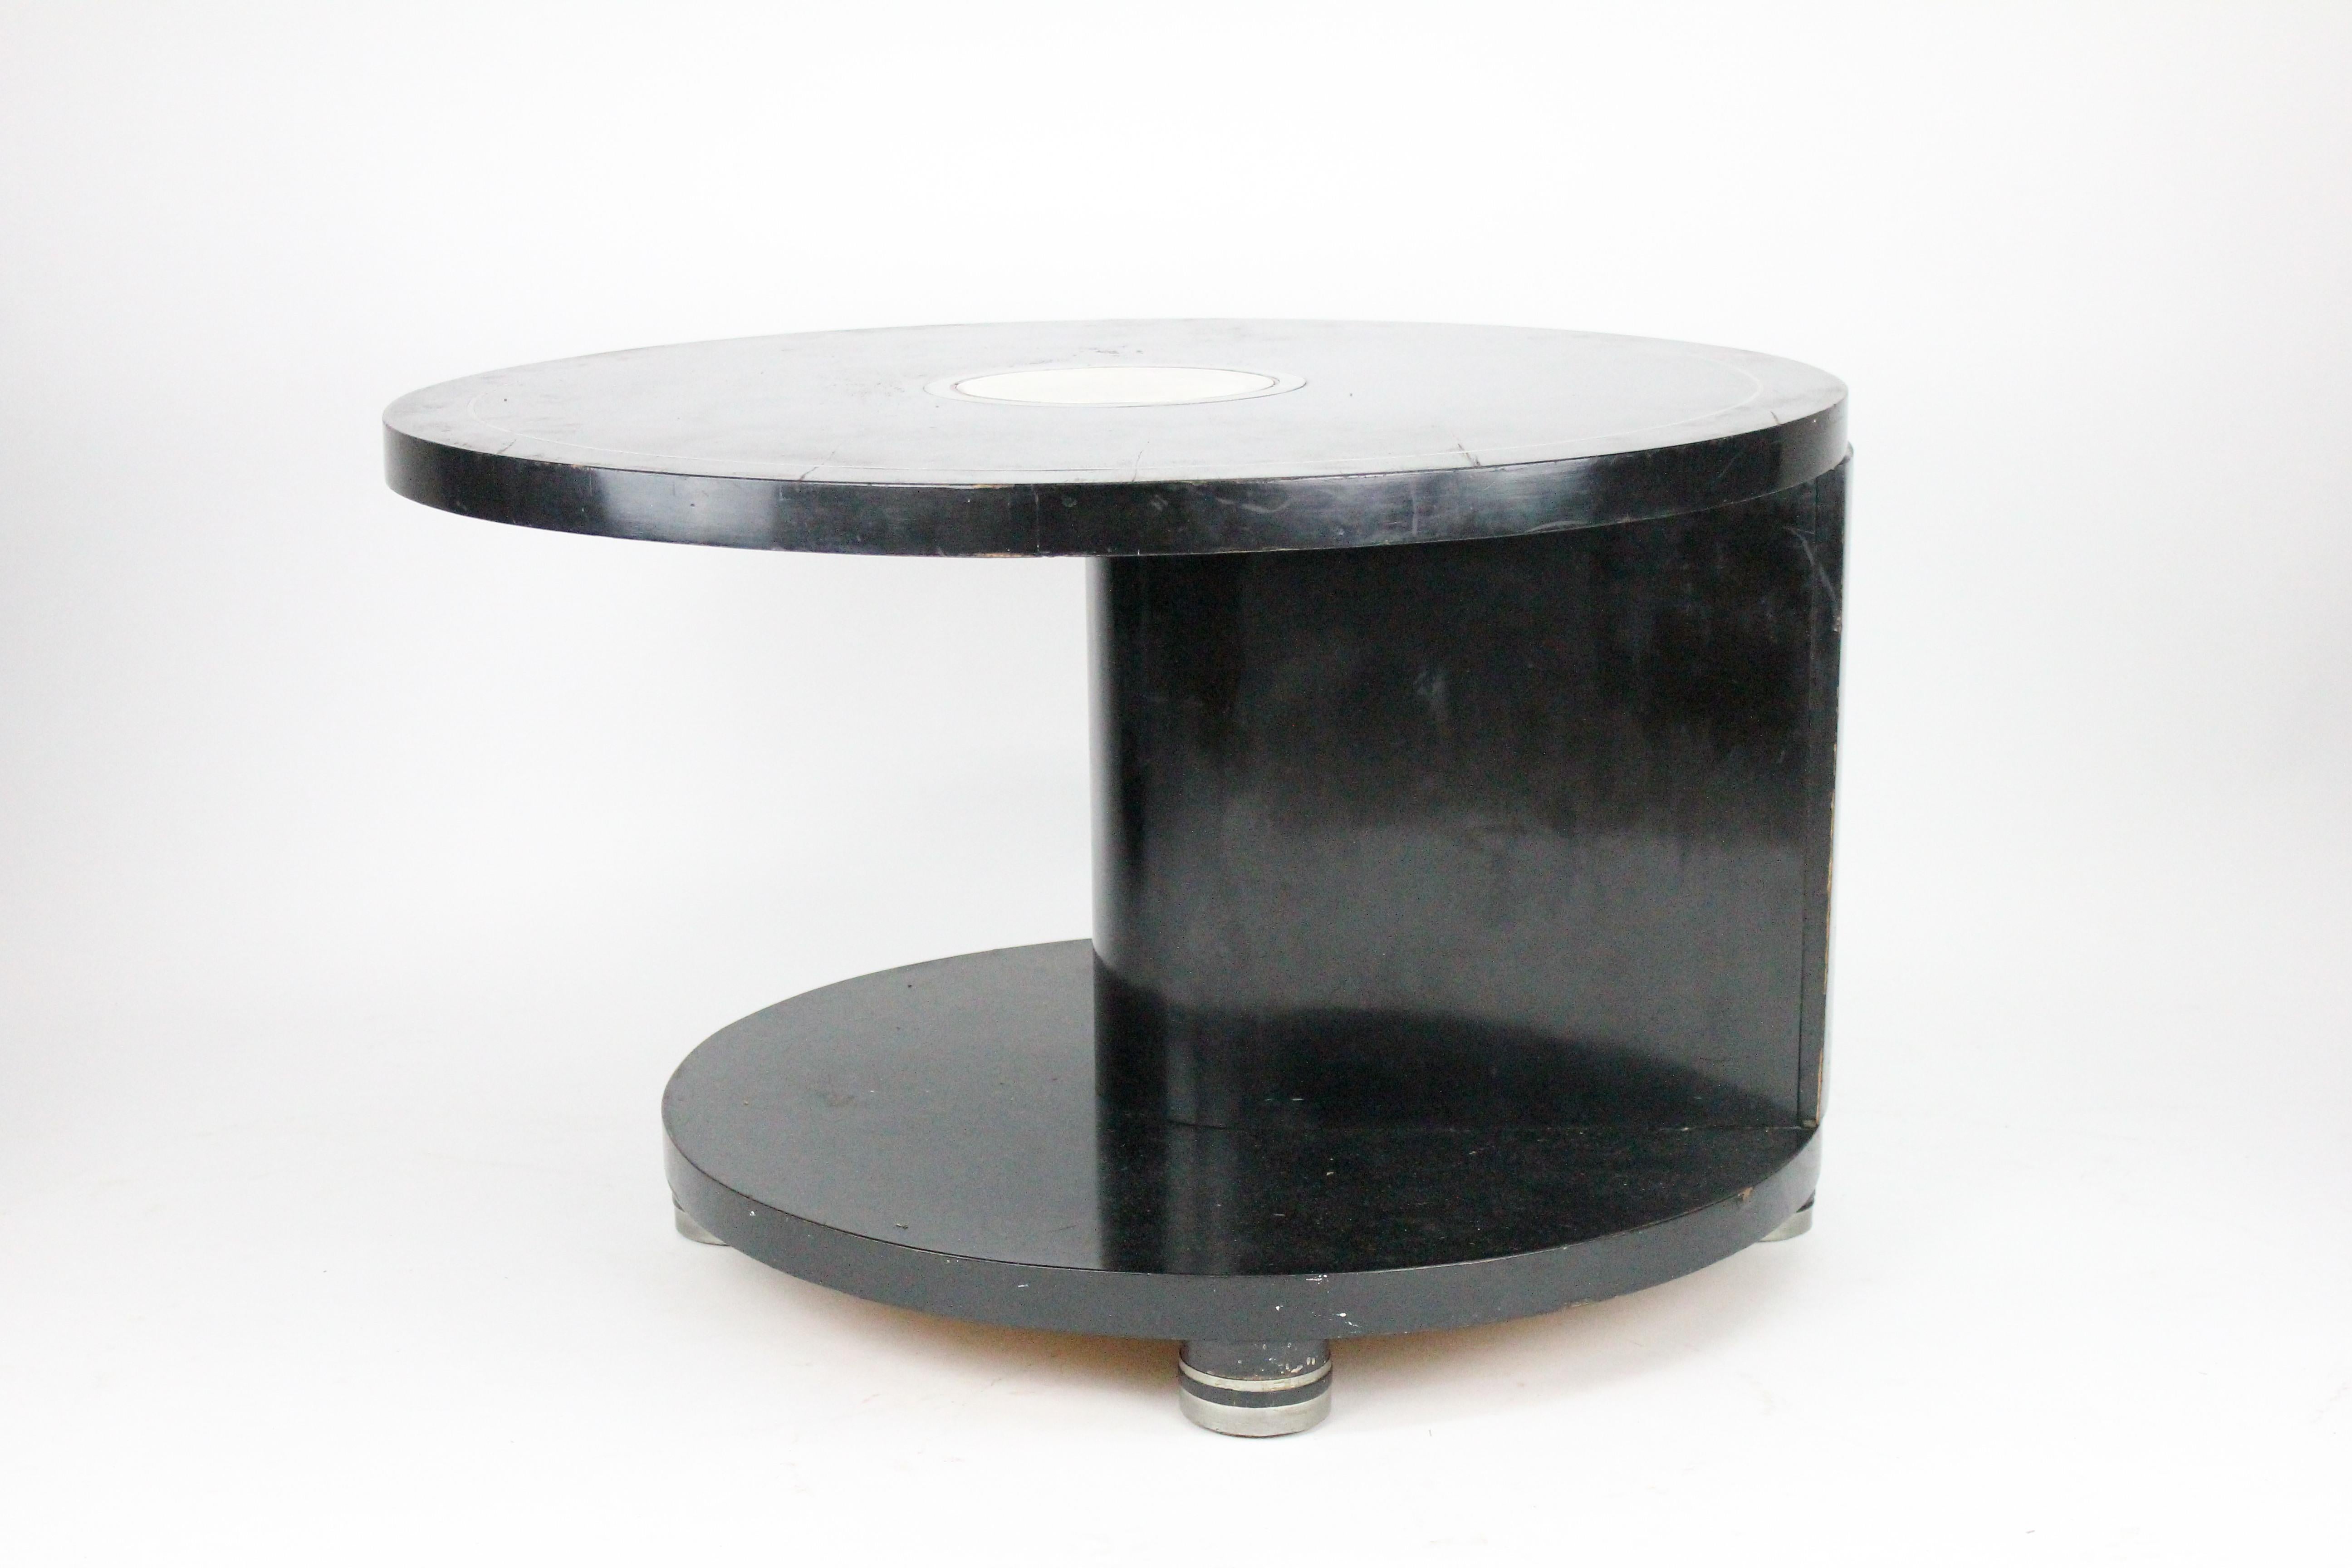 Alvar Andersson Table, 1933, Swedish, Black Painted with Pewter Inlays 13